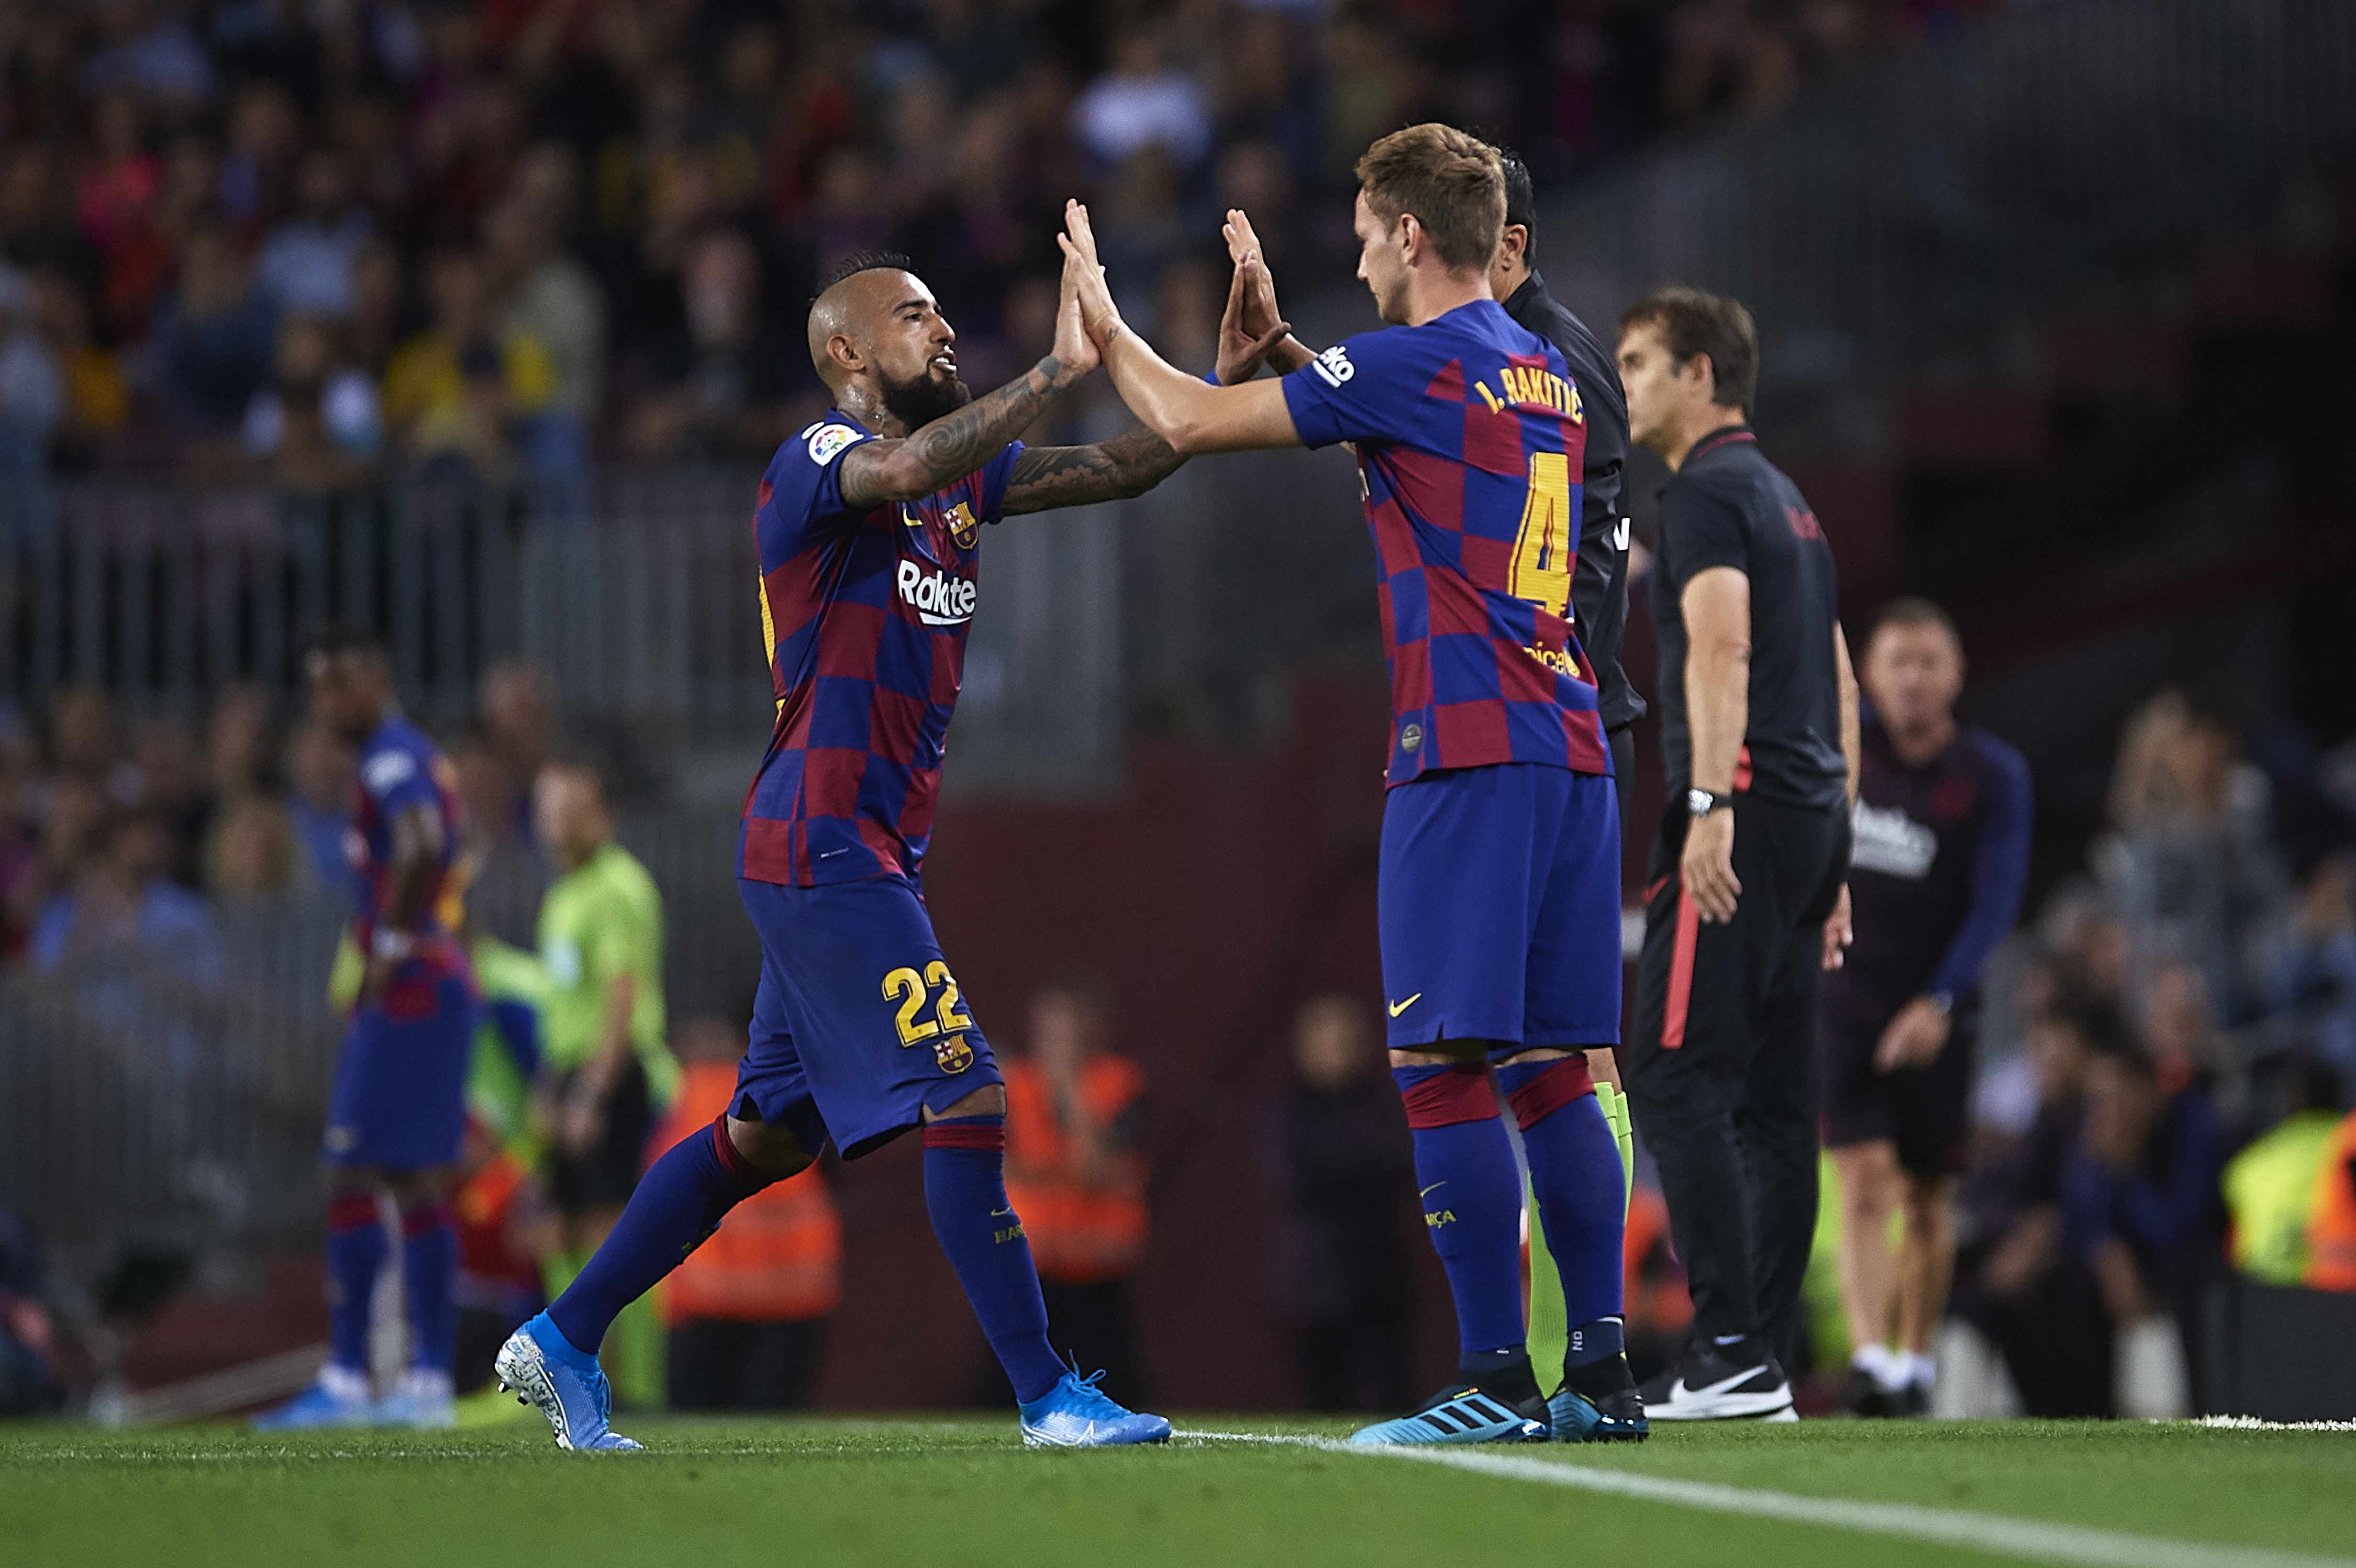 BARCELONA, SPAIN - OCTOBER 06: Substitute Ivan Rakitic of FC Barcelona (R) replaces Arturo Vidal of FC Barcelona (L) is substitu during the Liga match between FC Barcelona and Sevilla FC at Camp Nou on October 06, 2019 in Barcelona, Spain. (Photo by Aitor Alcalde/Getty Images)